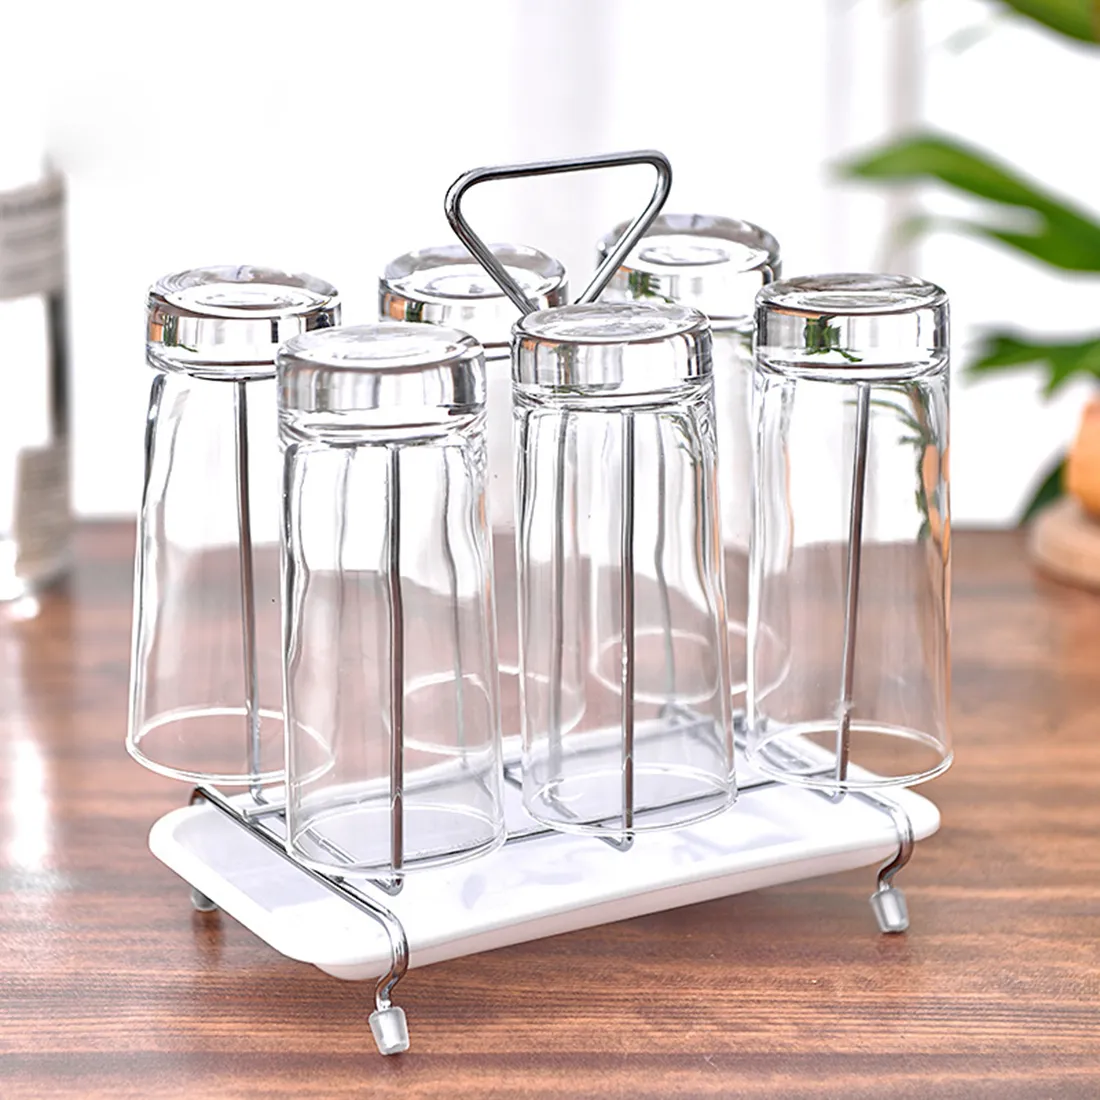 Hot Metal Glass Cup Rack Water Mug Draining Organizer Cup Drying Stand Dryer Cleaning Feeding Cups Stand Holder - Square Shape T200506